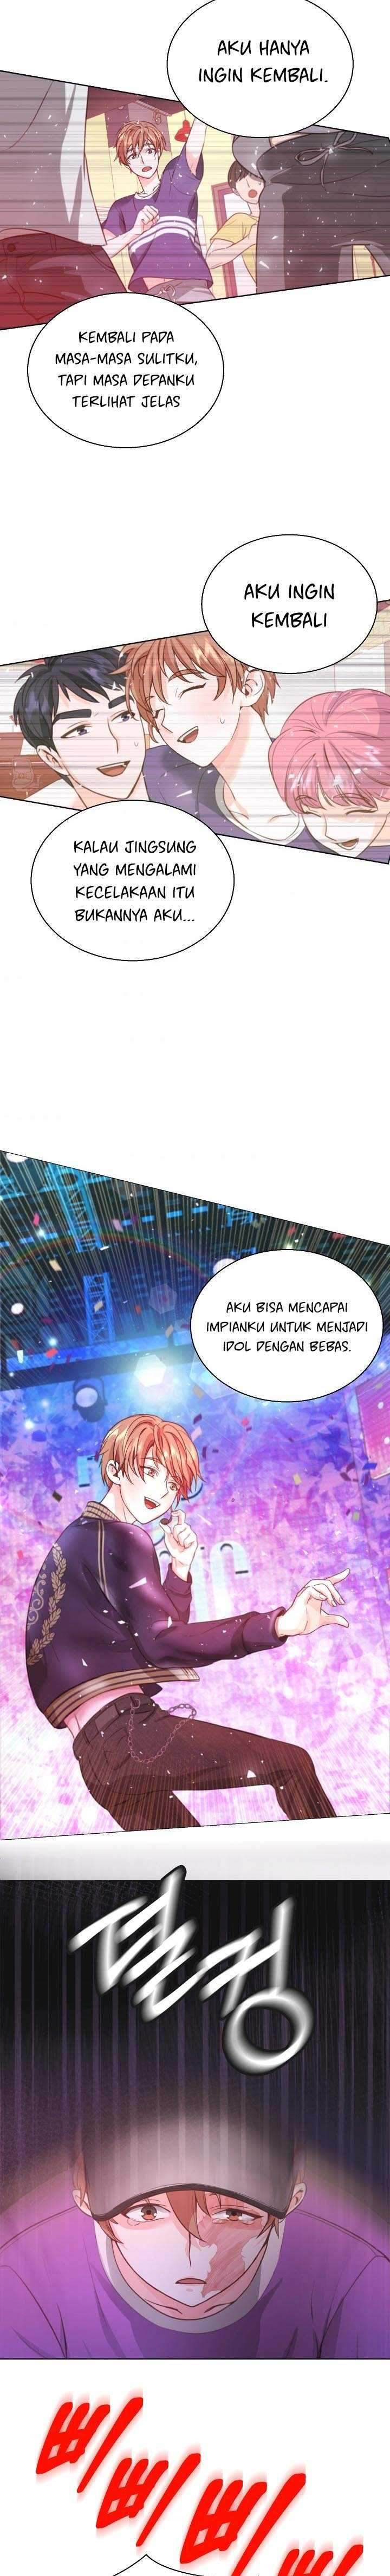 Once Again Idol Chapter 1